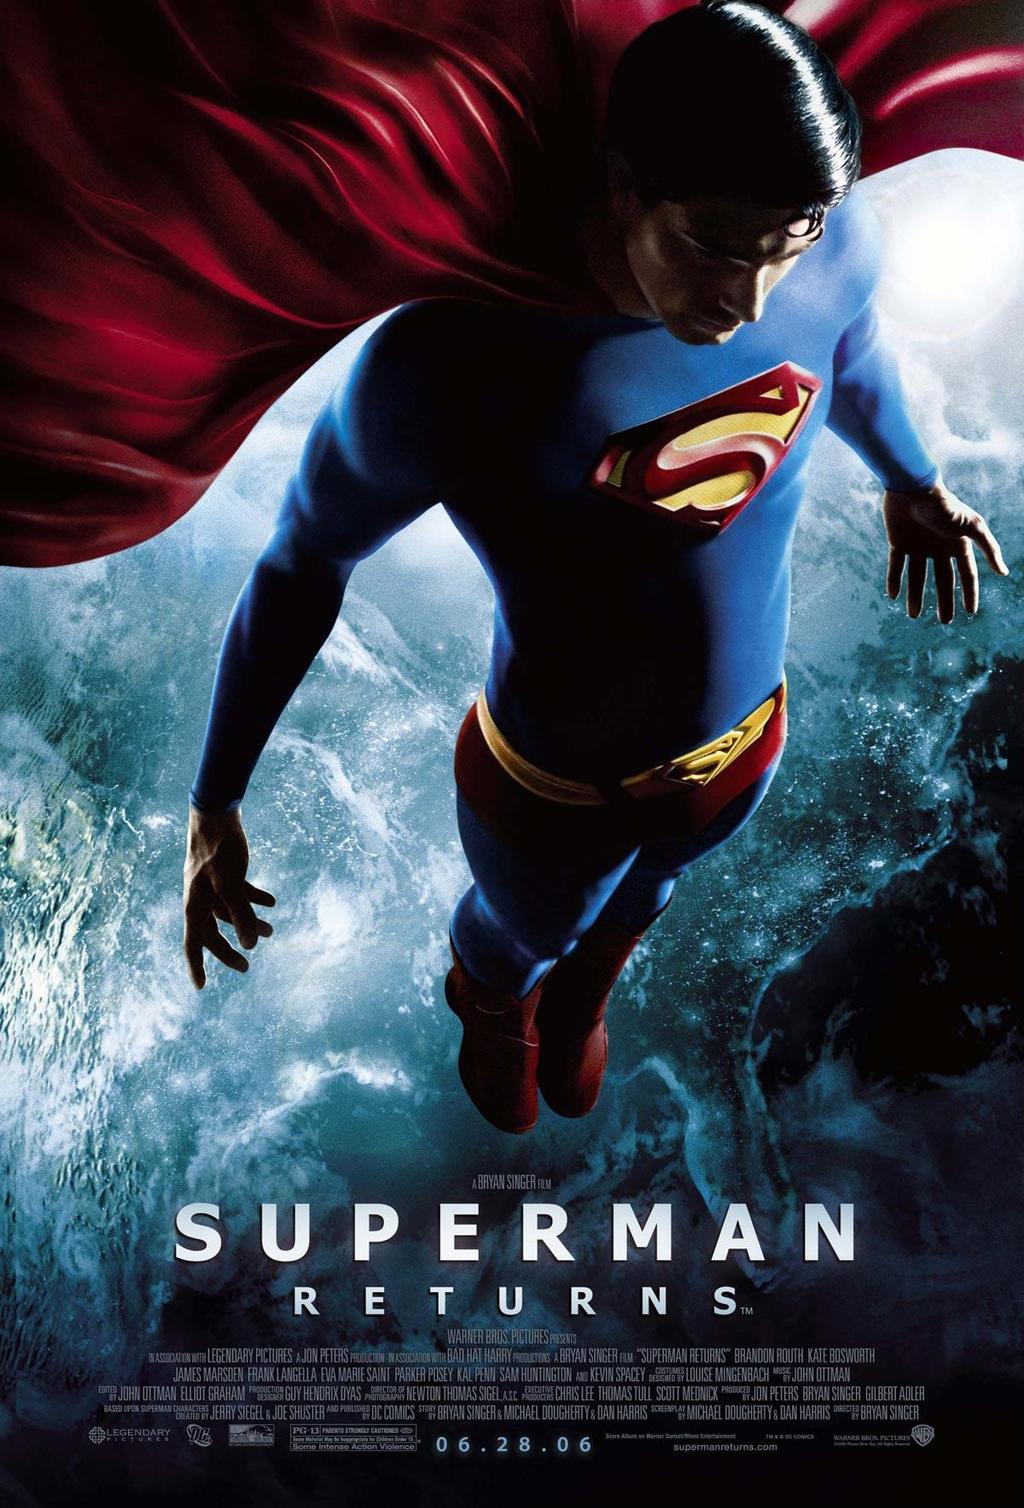 Following a mysterious absence of several years, the Man of Steel comes back to Earth in the epic